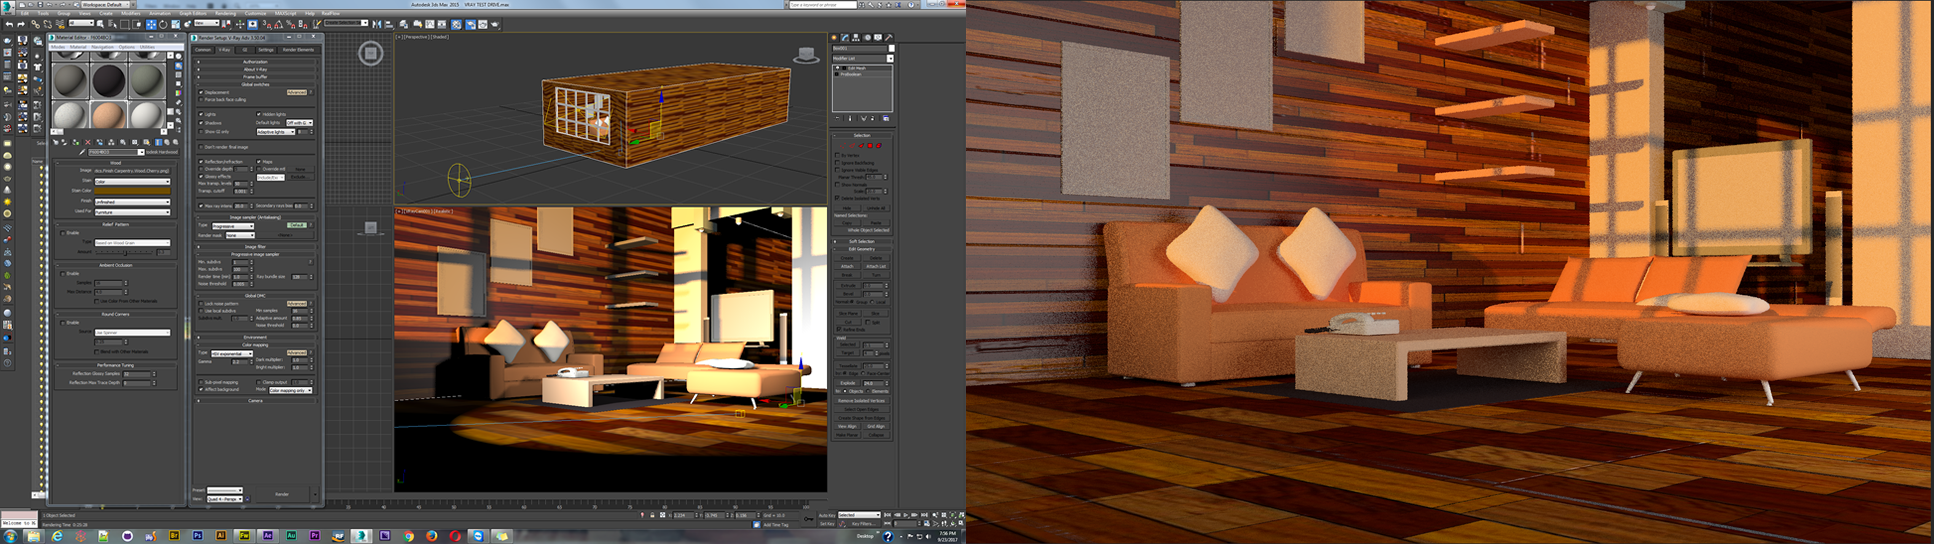 Too much noise in my 3dsmax vray render , it took 22minutes - Autodesk  Community - 3ds Max